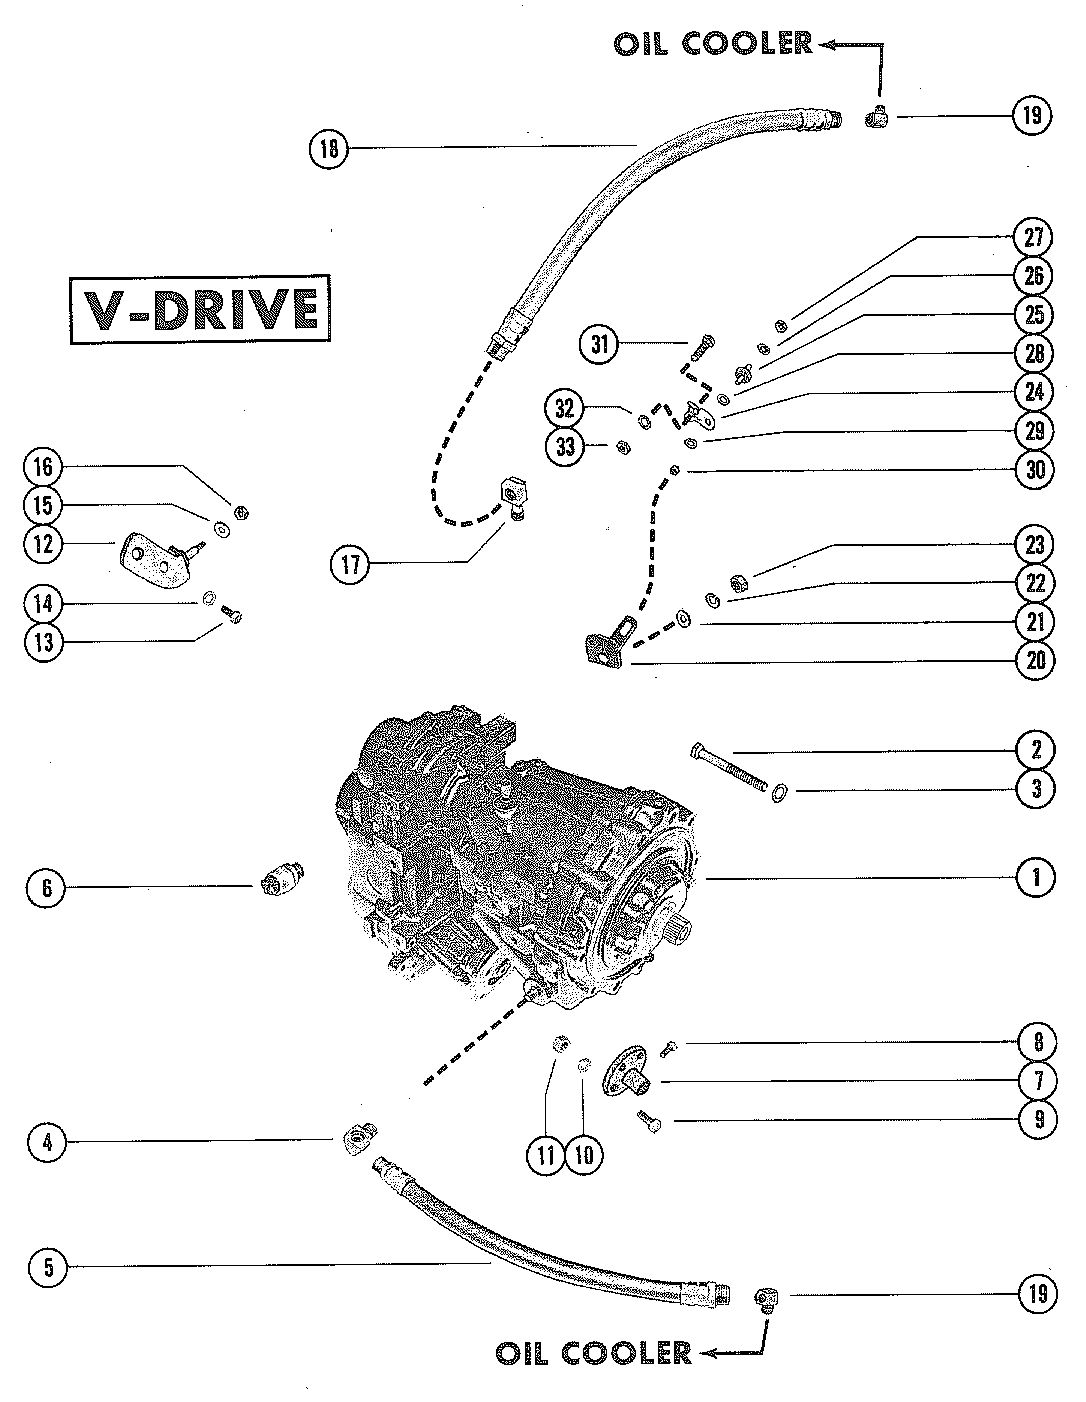 MERCRUISER 233 ENGINE TRANSMISSION AND RELATED PARTS (V-DRIVE)